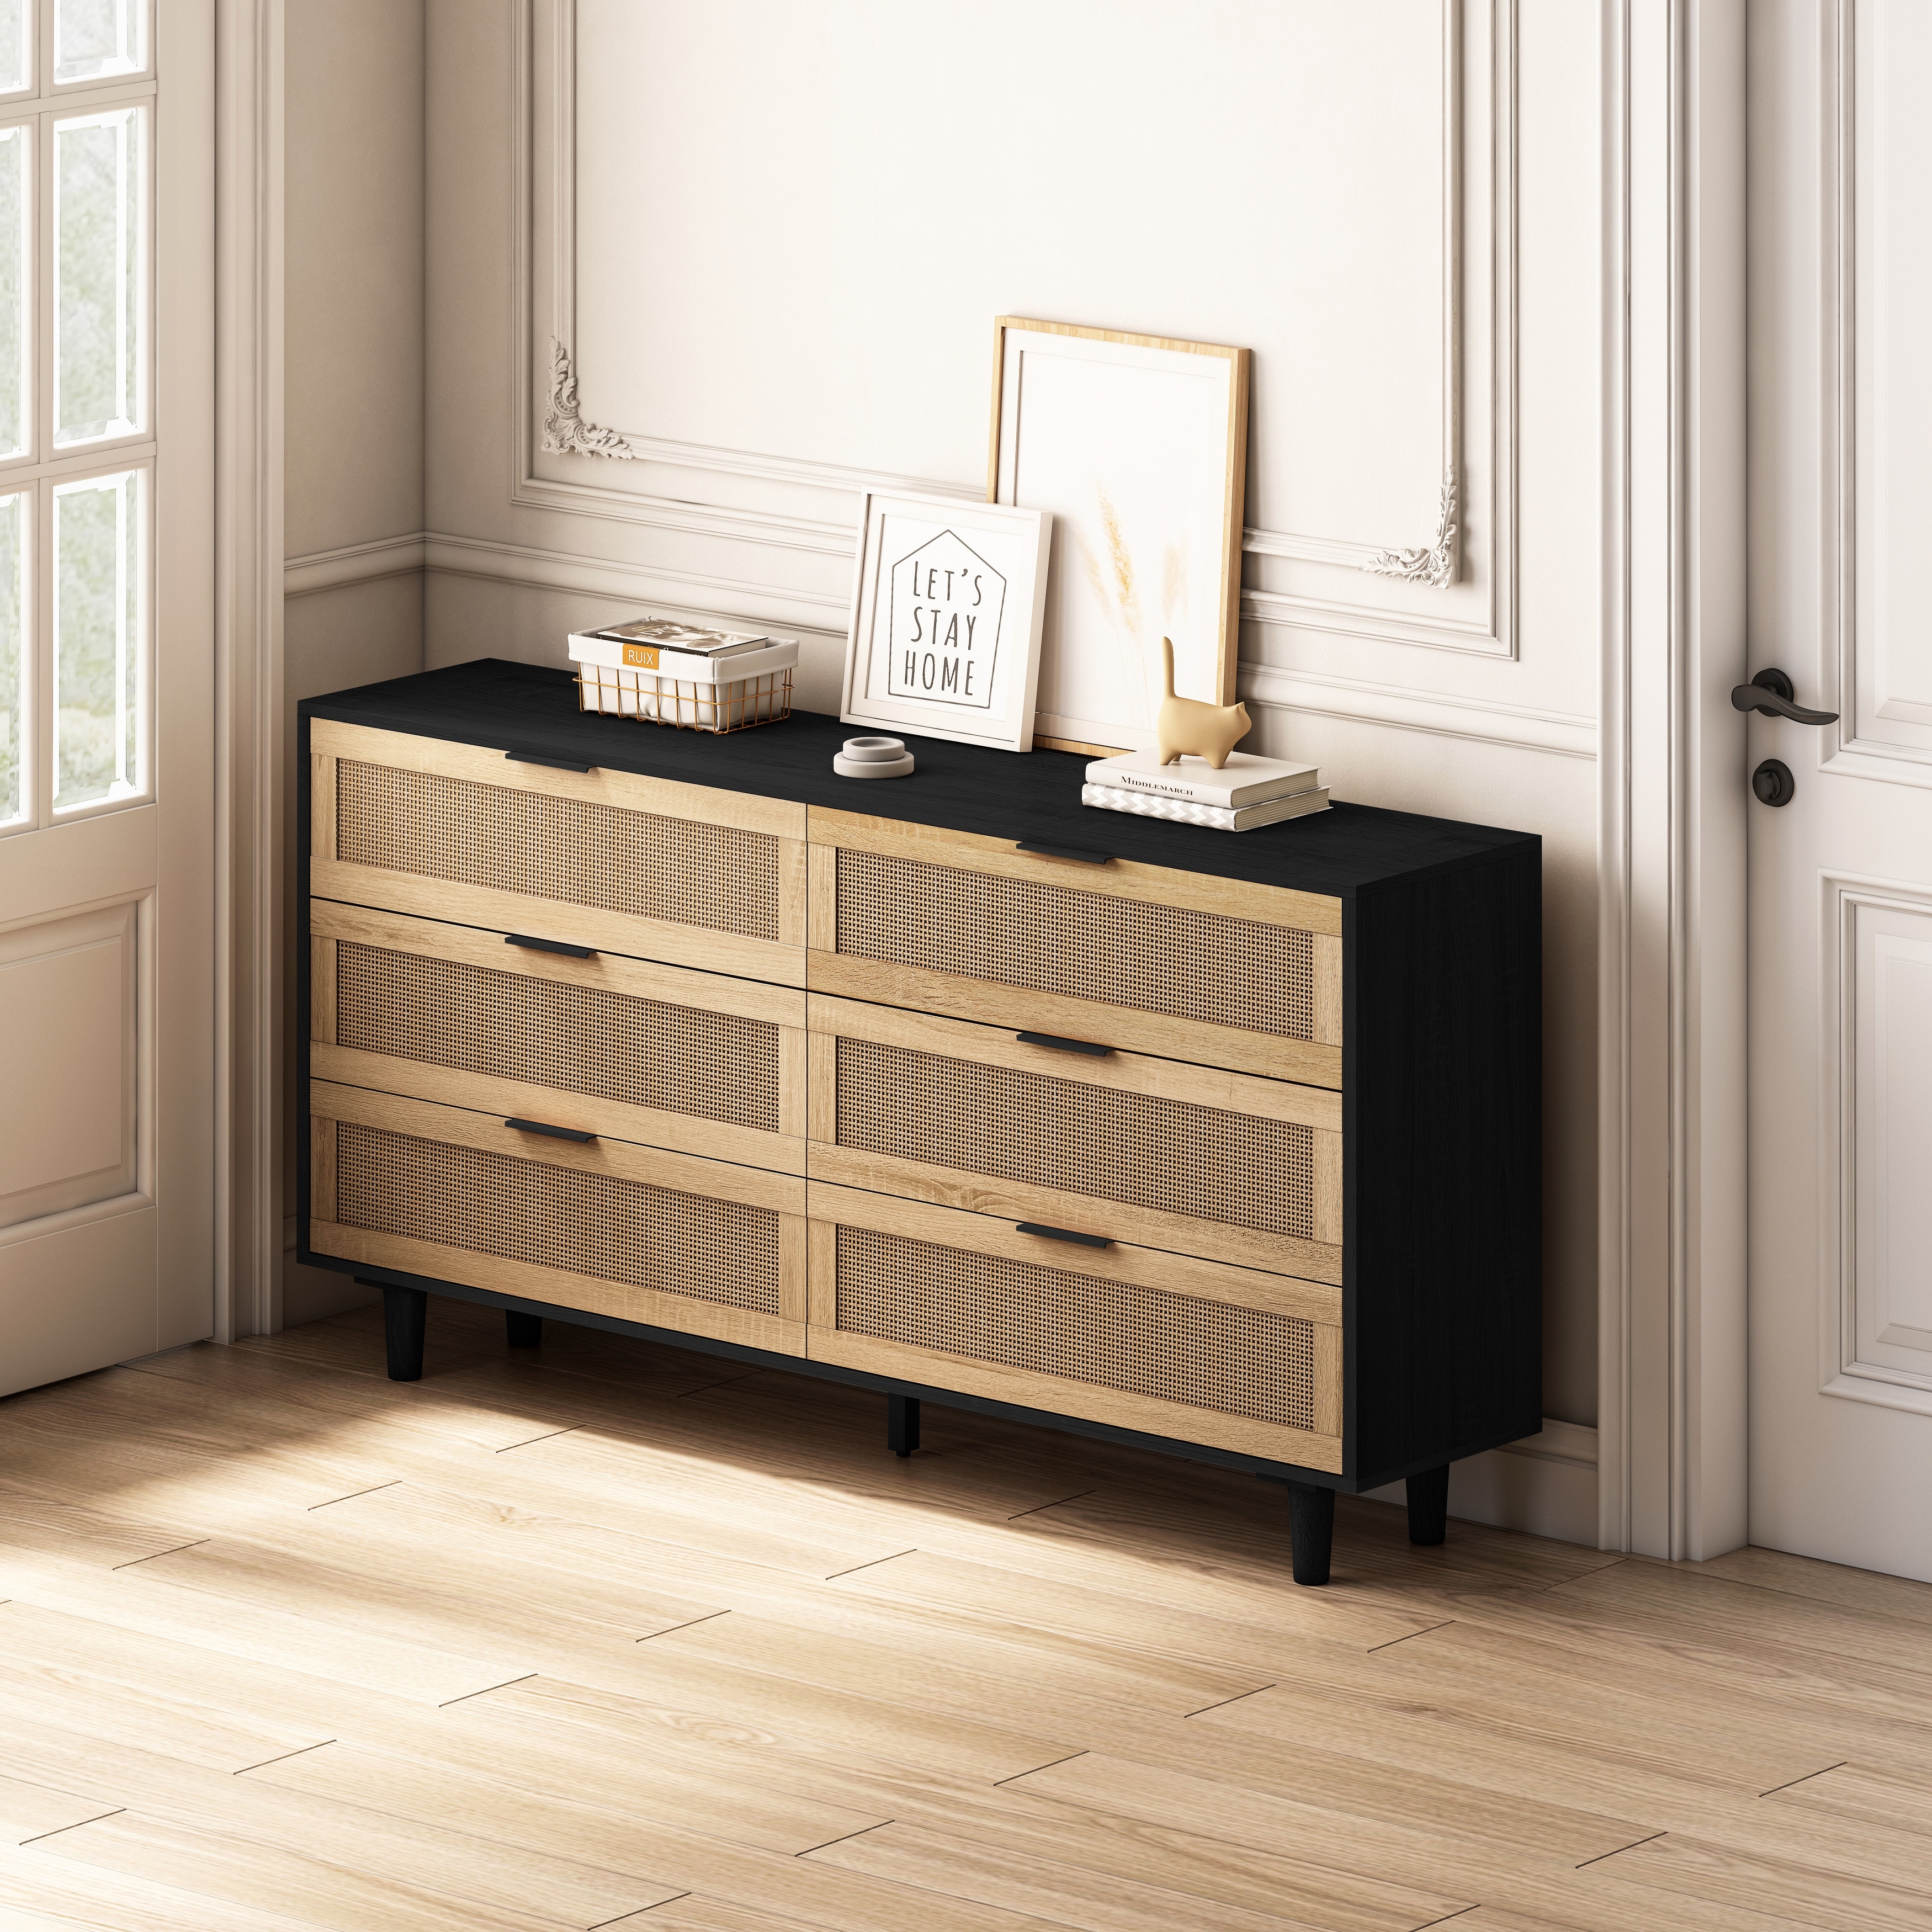 https://ak1.ostkcdn.com/images/products/is/images/direct/5f1905b2ca2eaf5f44ef7a1458ef13bc58a47668/Simple-6-drawers-Rattan-dresser-Rattan-Drawer%2CBedroom%2CLiving-Room.jpg